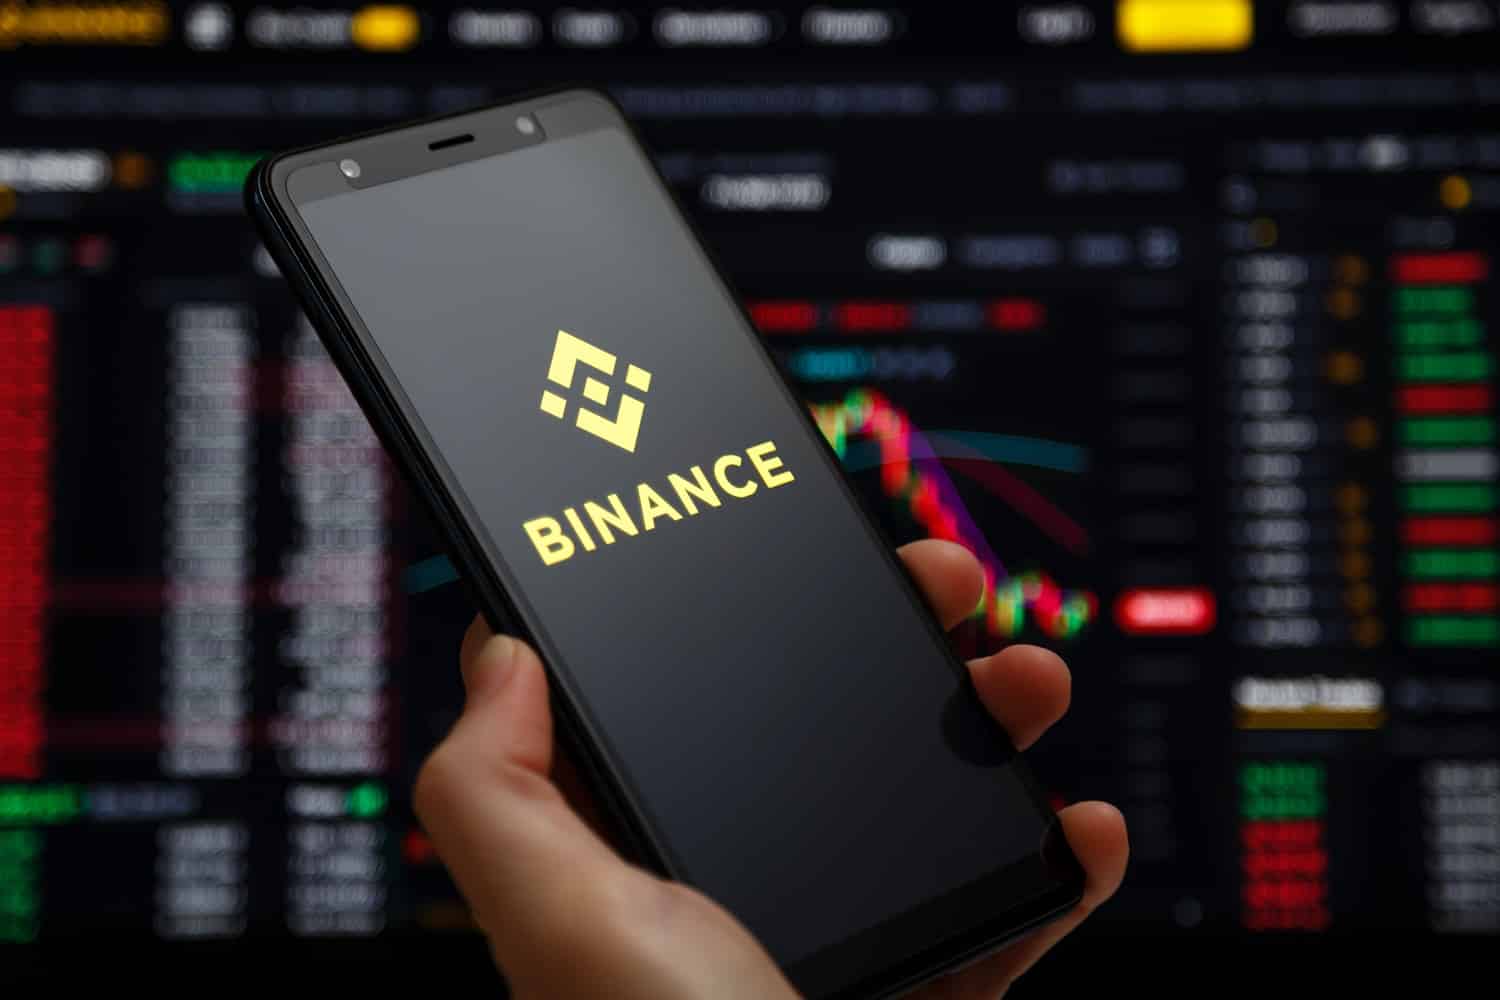 The Binance mobile app running on a smartphone screen with a trading page running on a laptop device in the background.